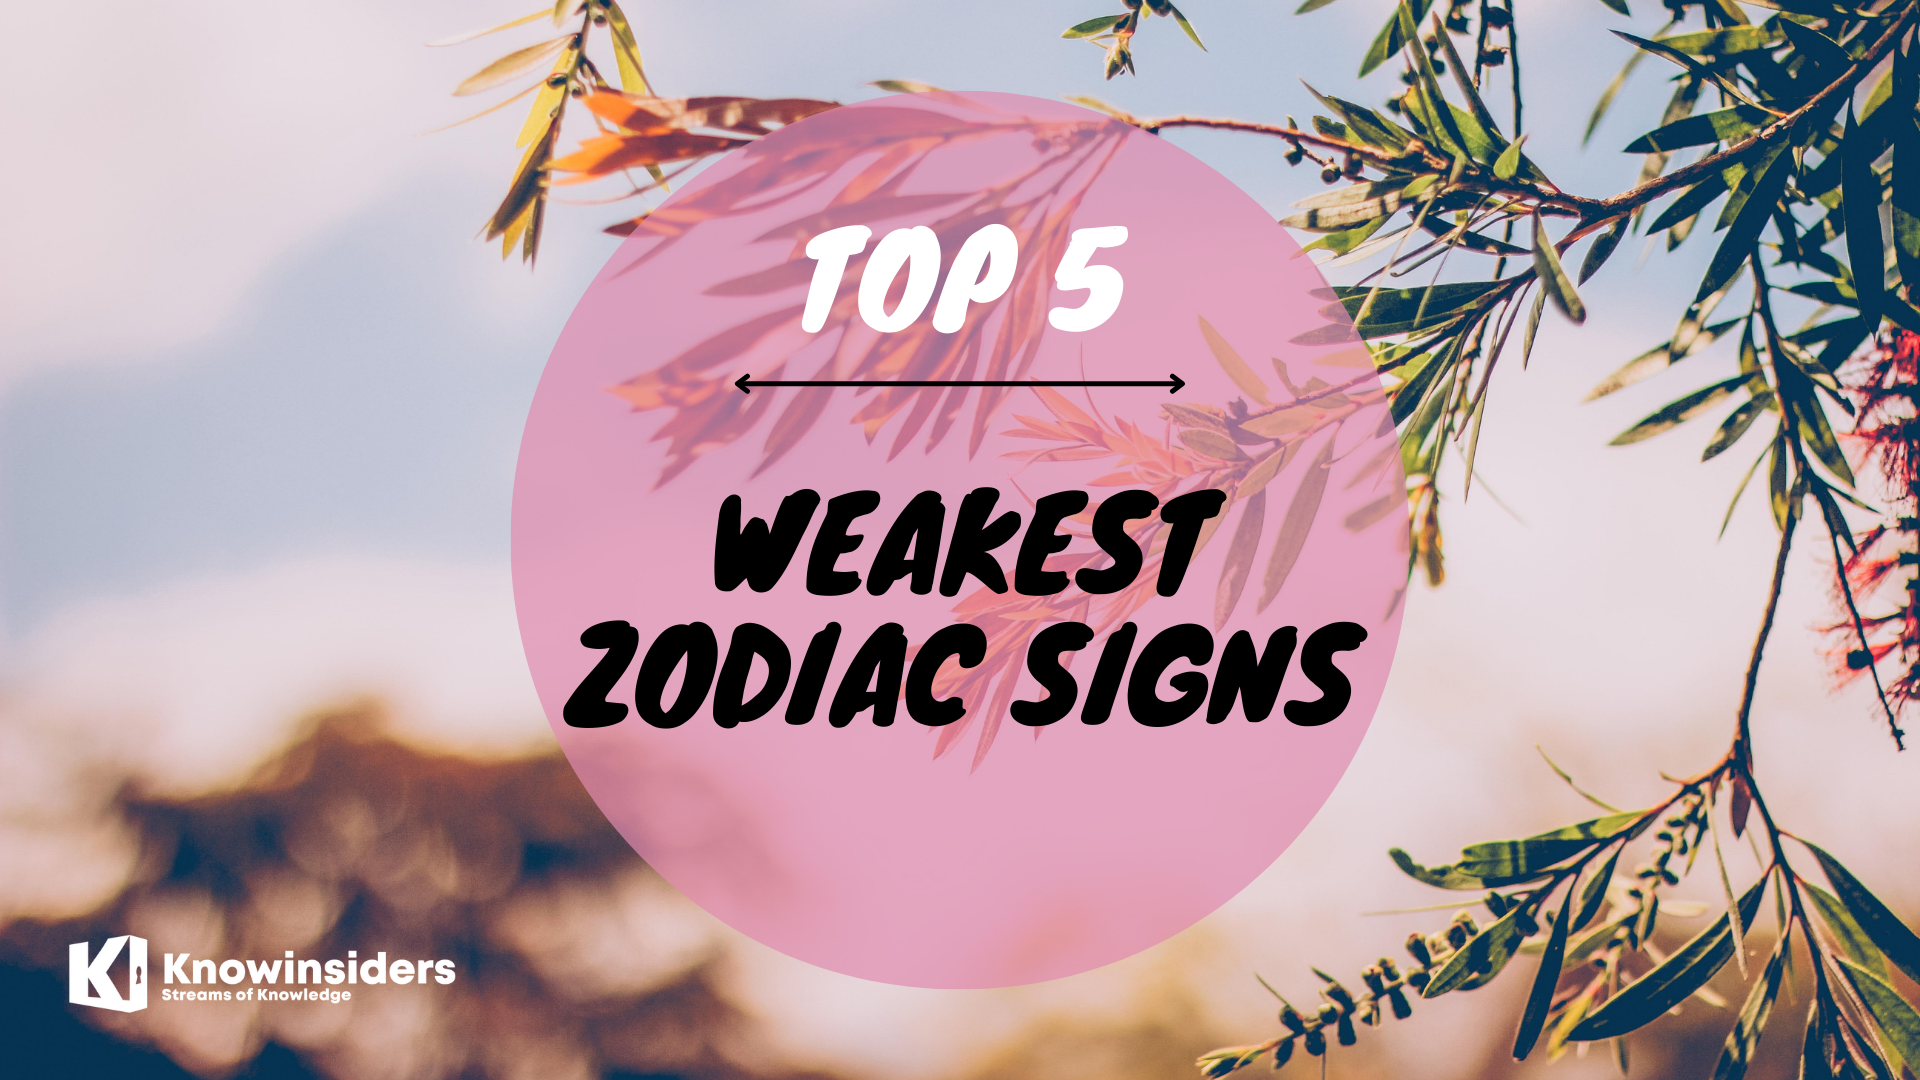 Top 5 Weakest Zodiac Signs According to Astrology